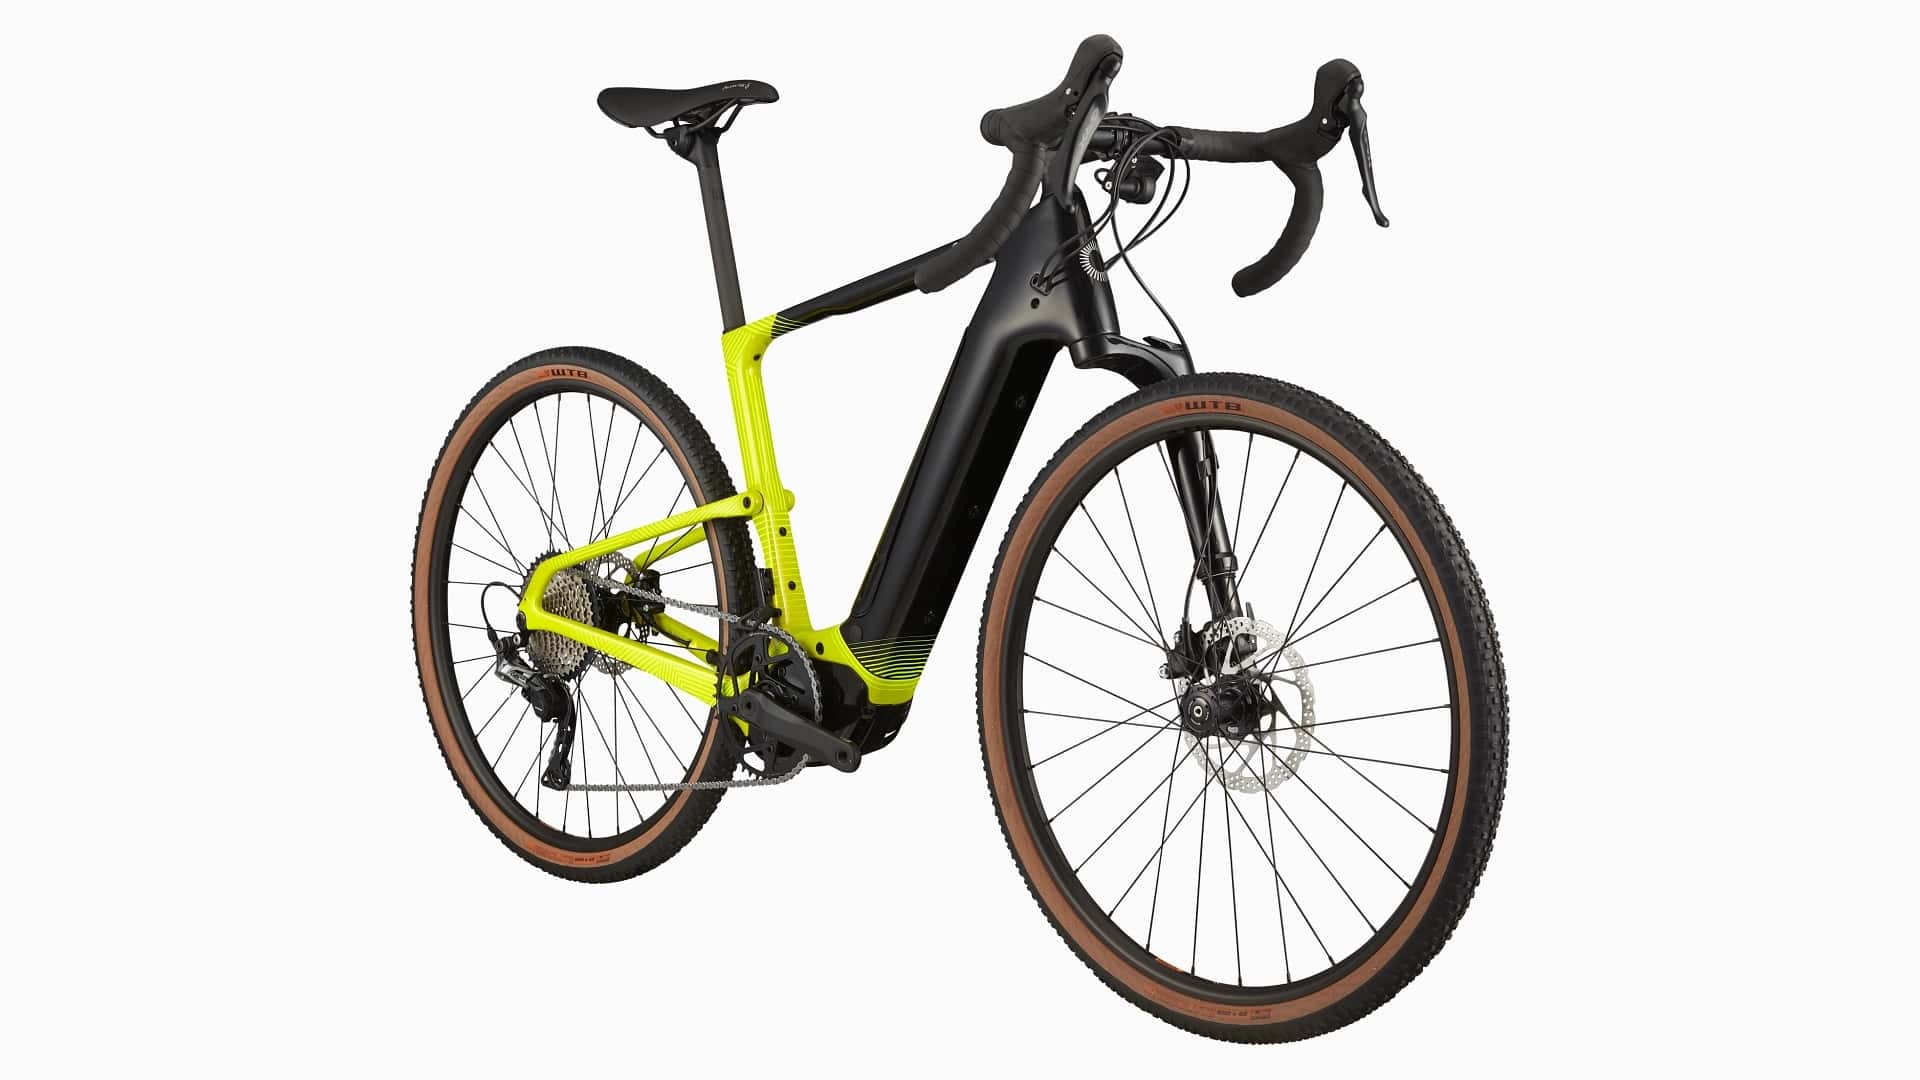 check out the cannondale topstone neo carbon lefty 3 e-gravel bike